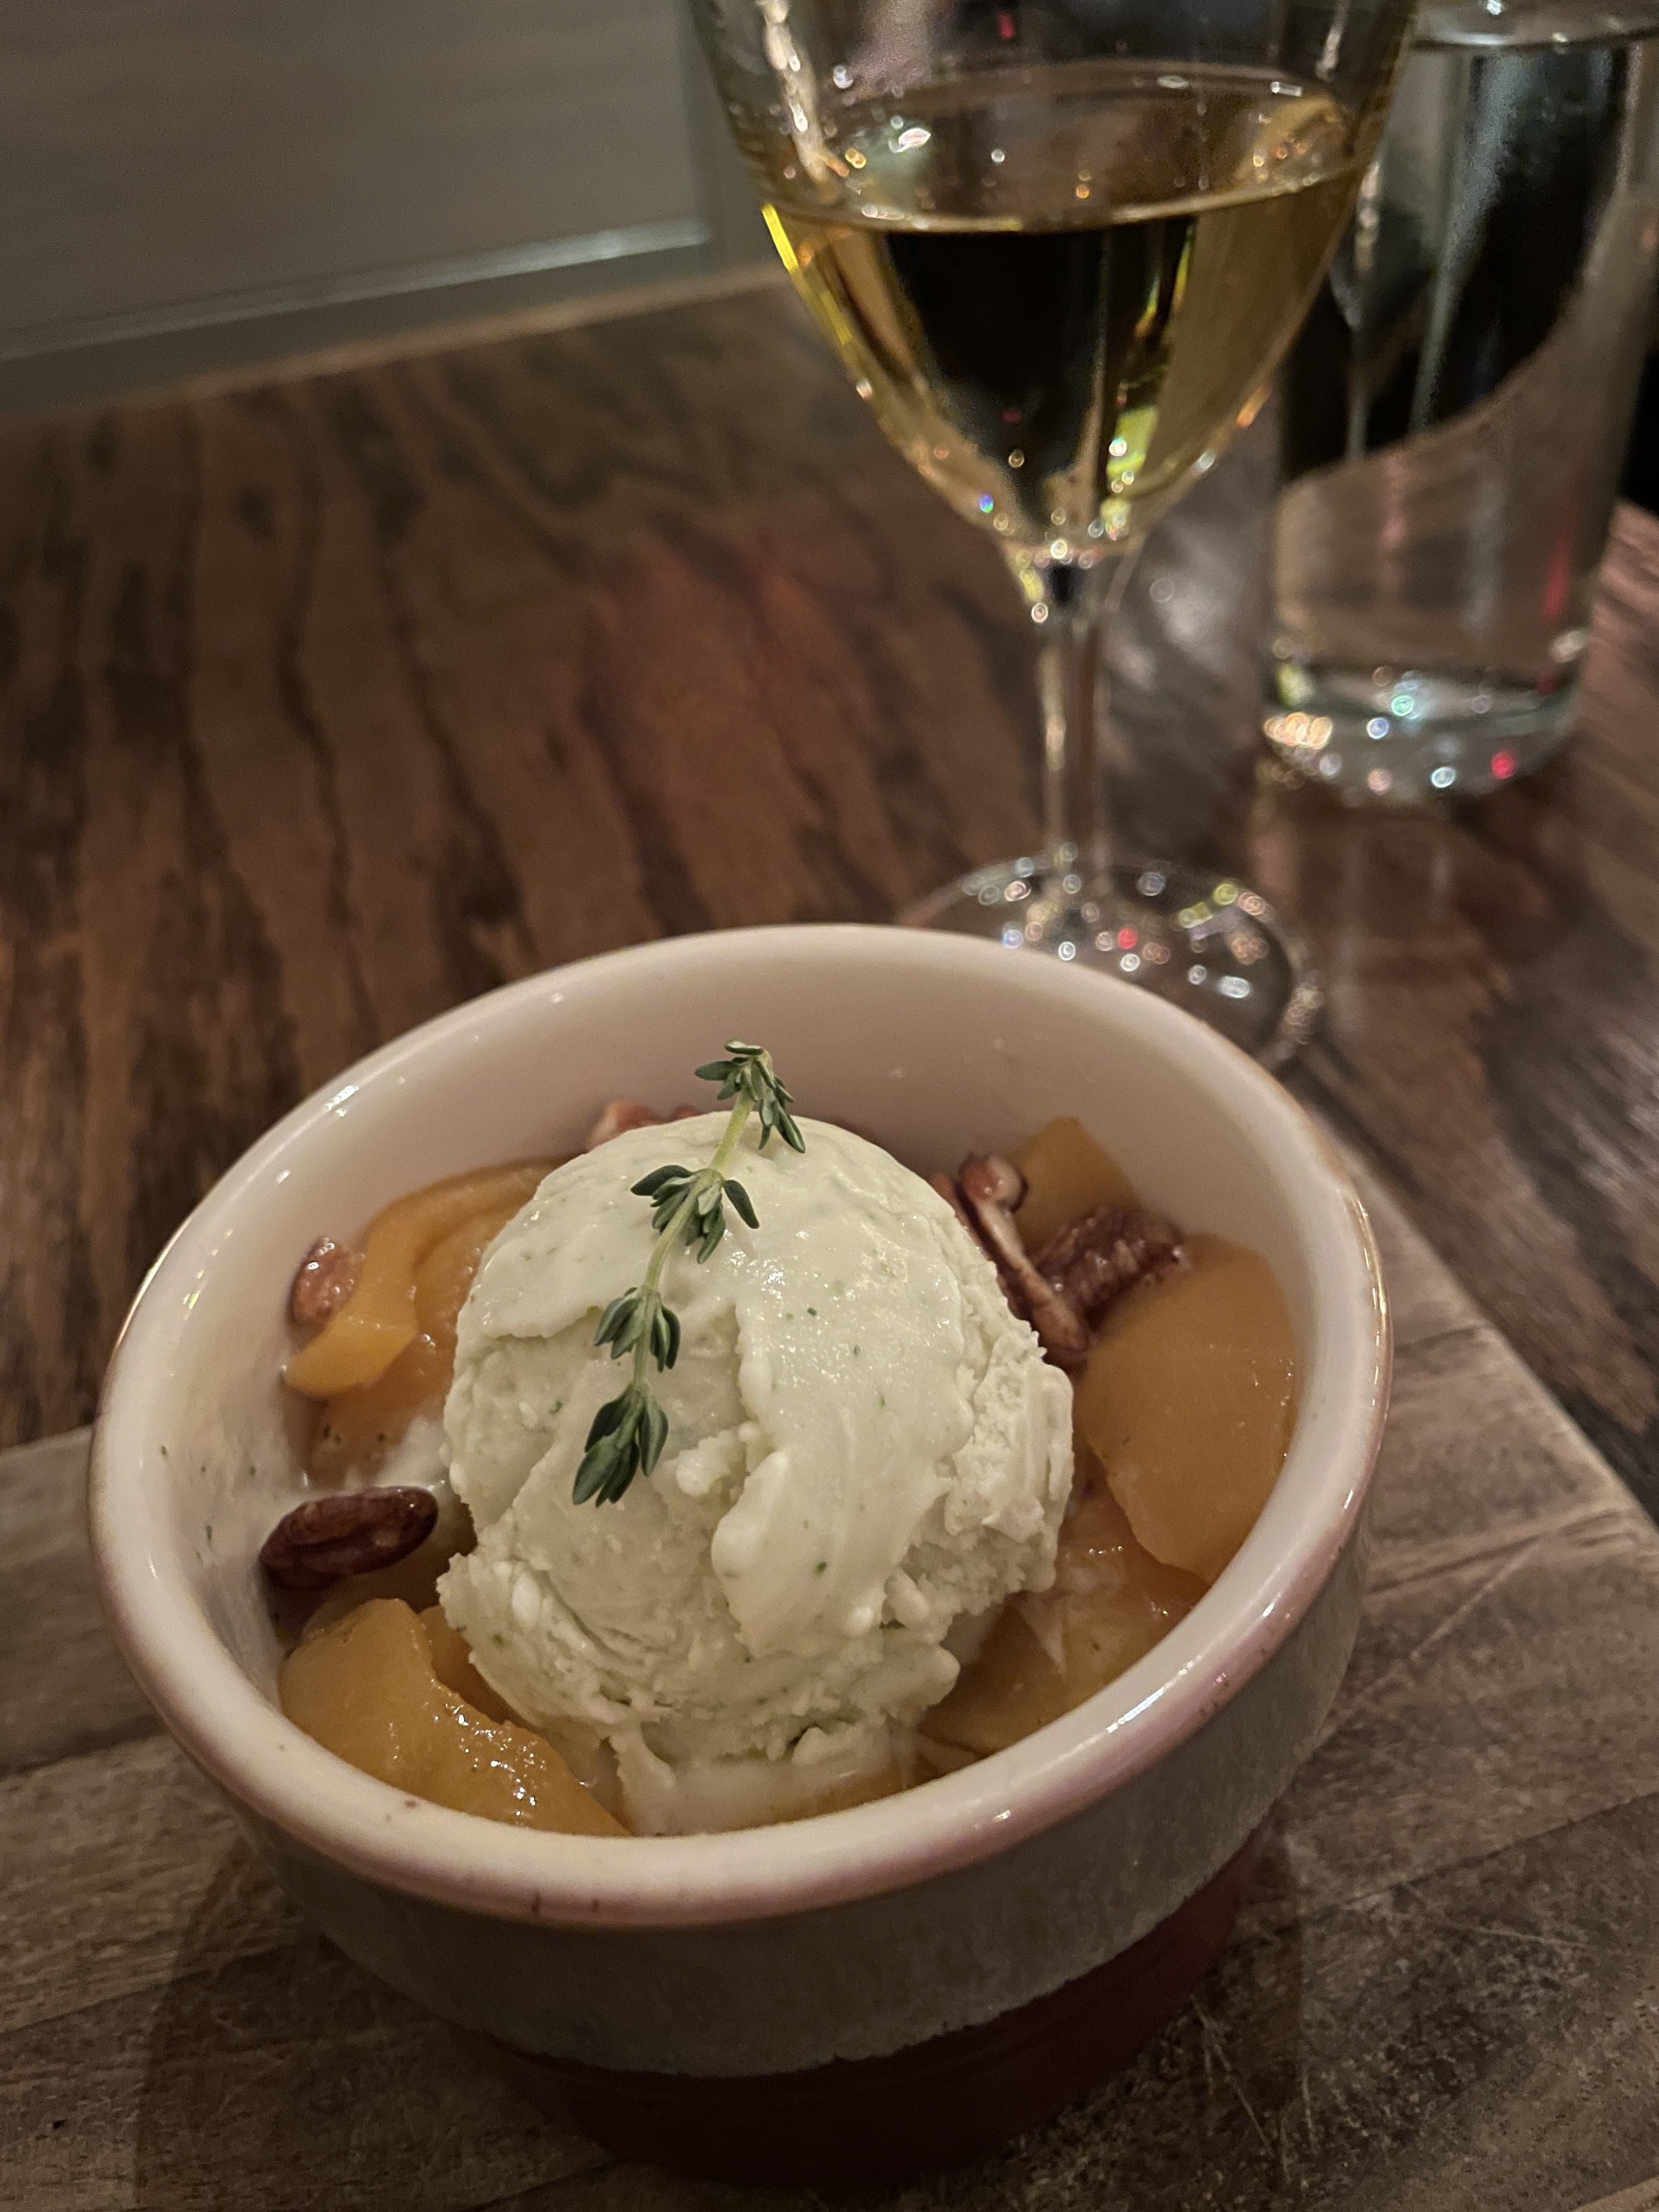 Peach Cobbler with Late Harvest South African Chenin Blanc